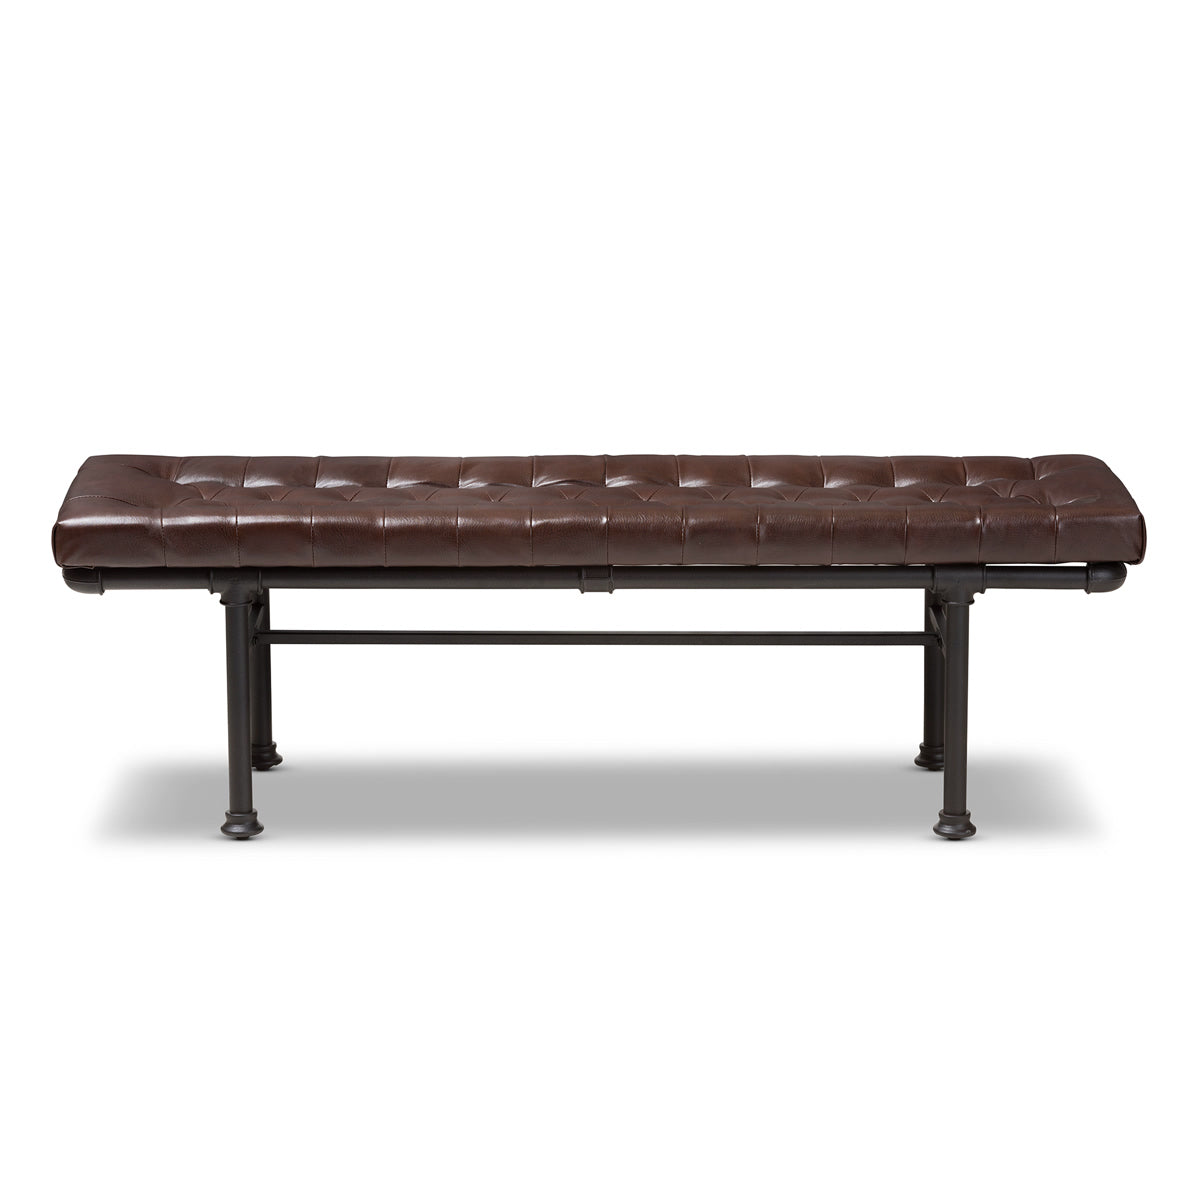 Baxton Studio Zelie Rustic and Industrial Brown Faux Leather Upholstered Bench Baxton Studio-benches-Minimal And Modern - 2